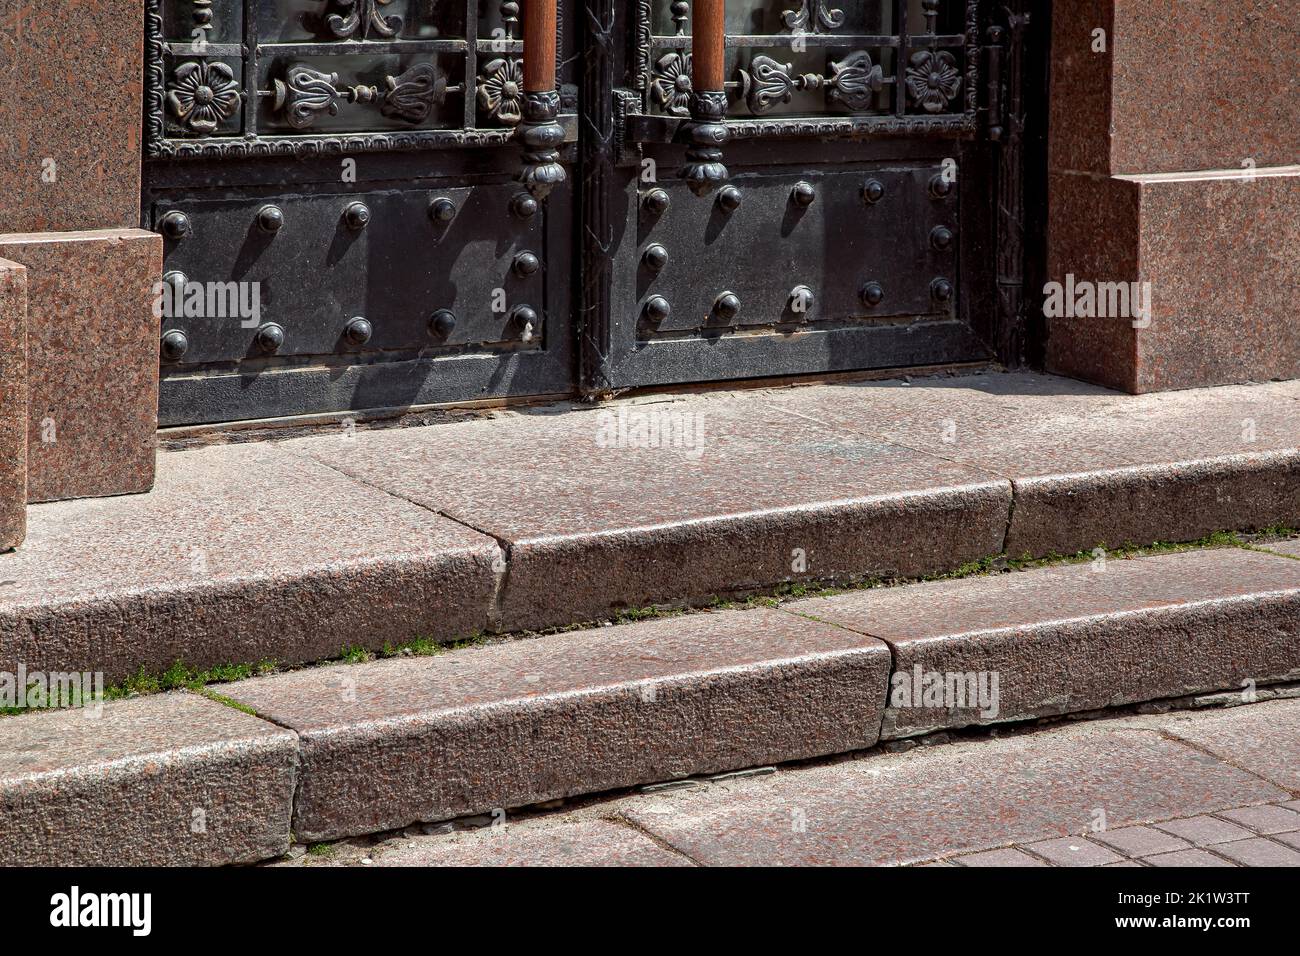 granite staircase with stone steps rise to the entrance black iron door with patterns and handles, building facade architecture lit by sun close-up, s Stock Photo